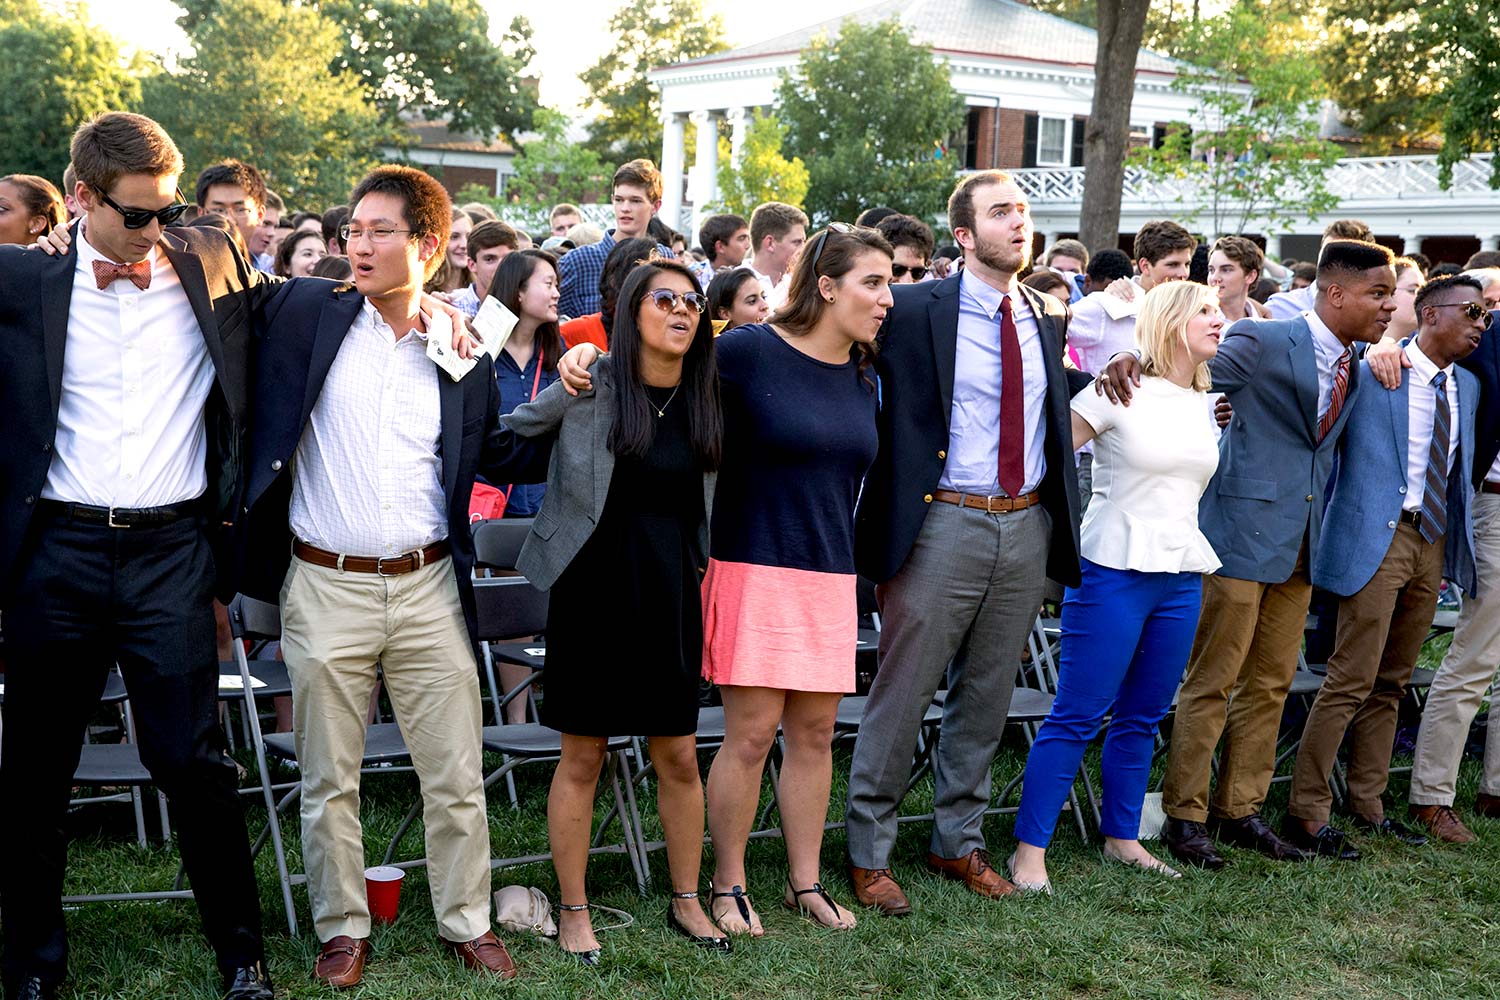 Students with arms wrapped around each other singing on the lawn during opening convocation